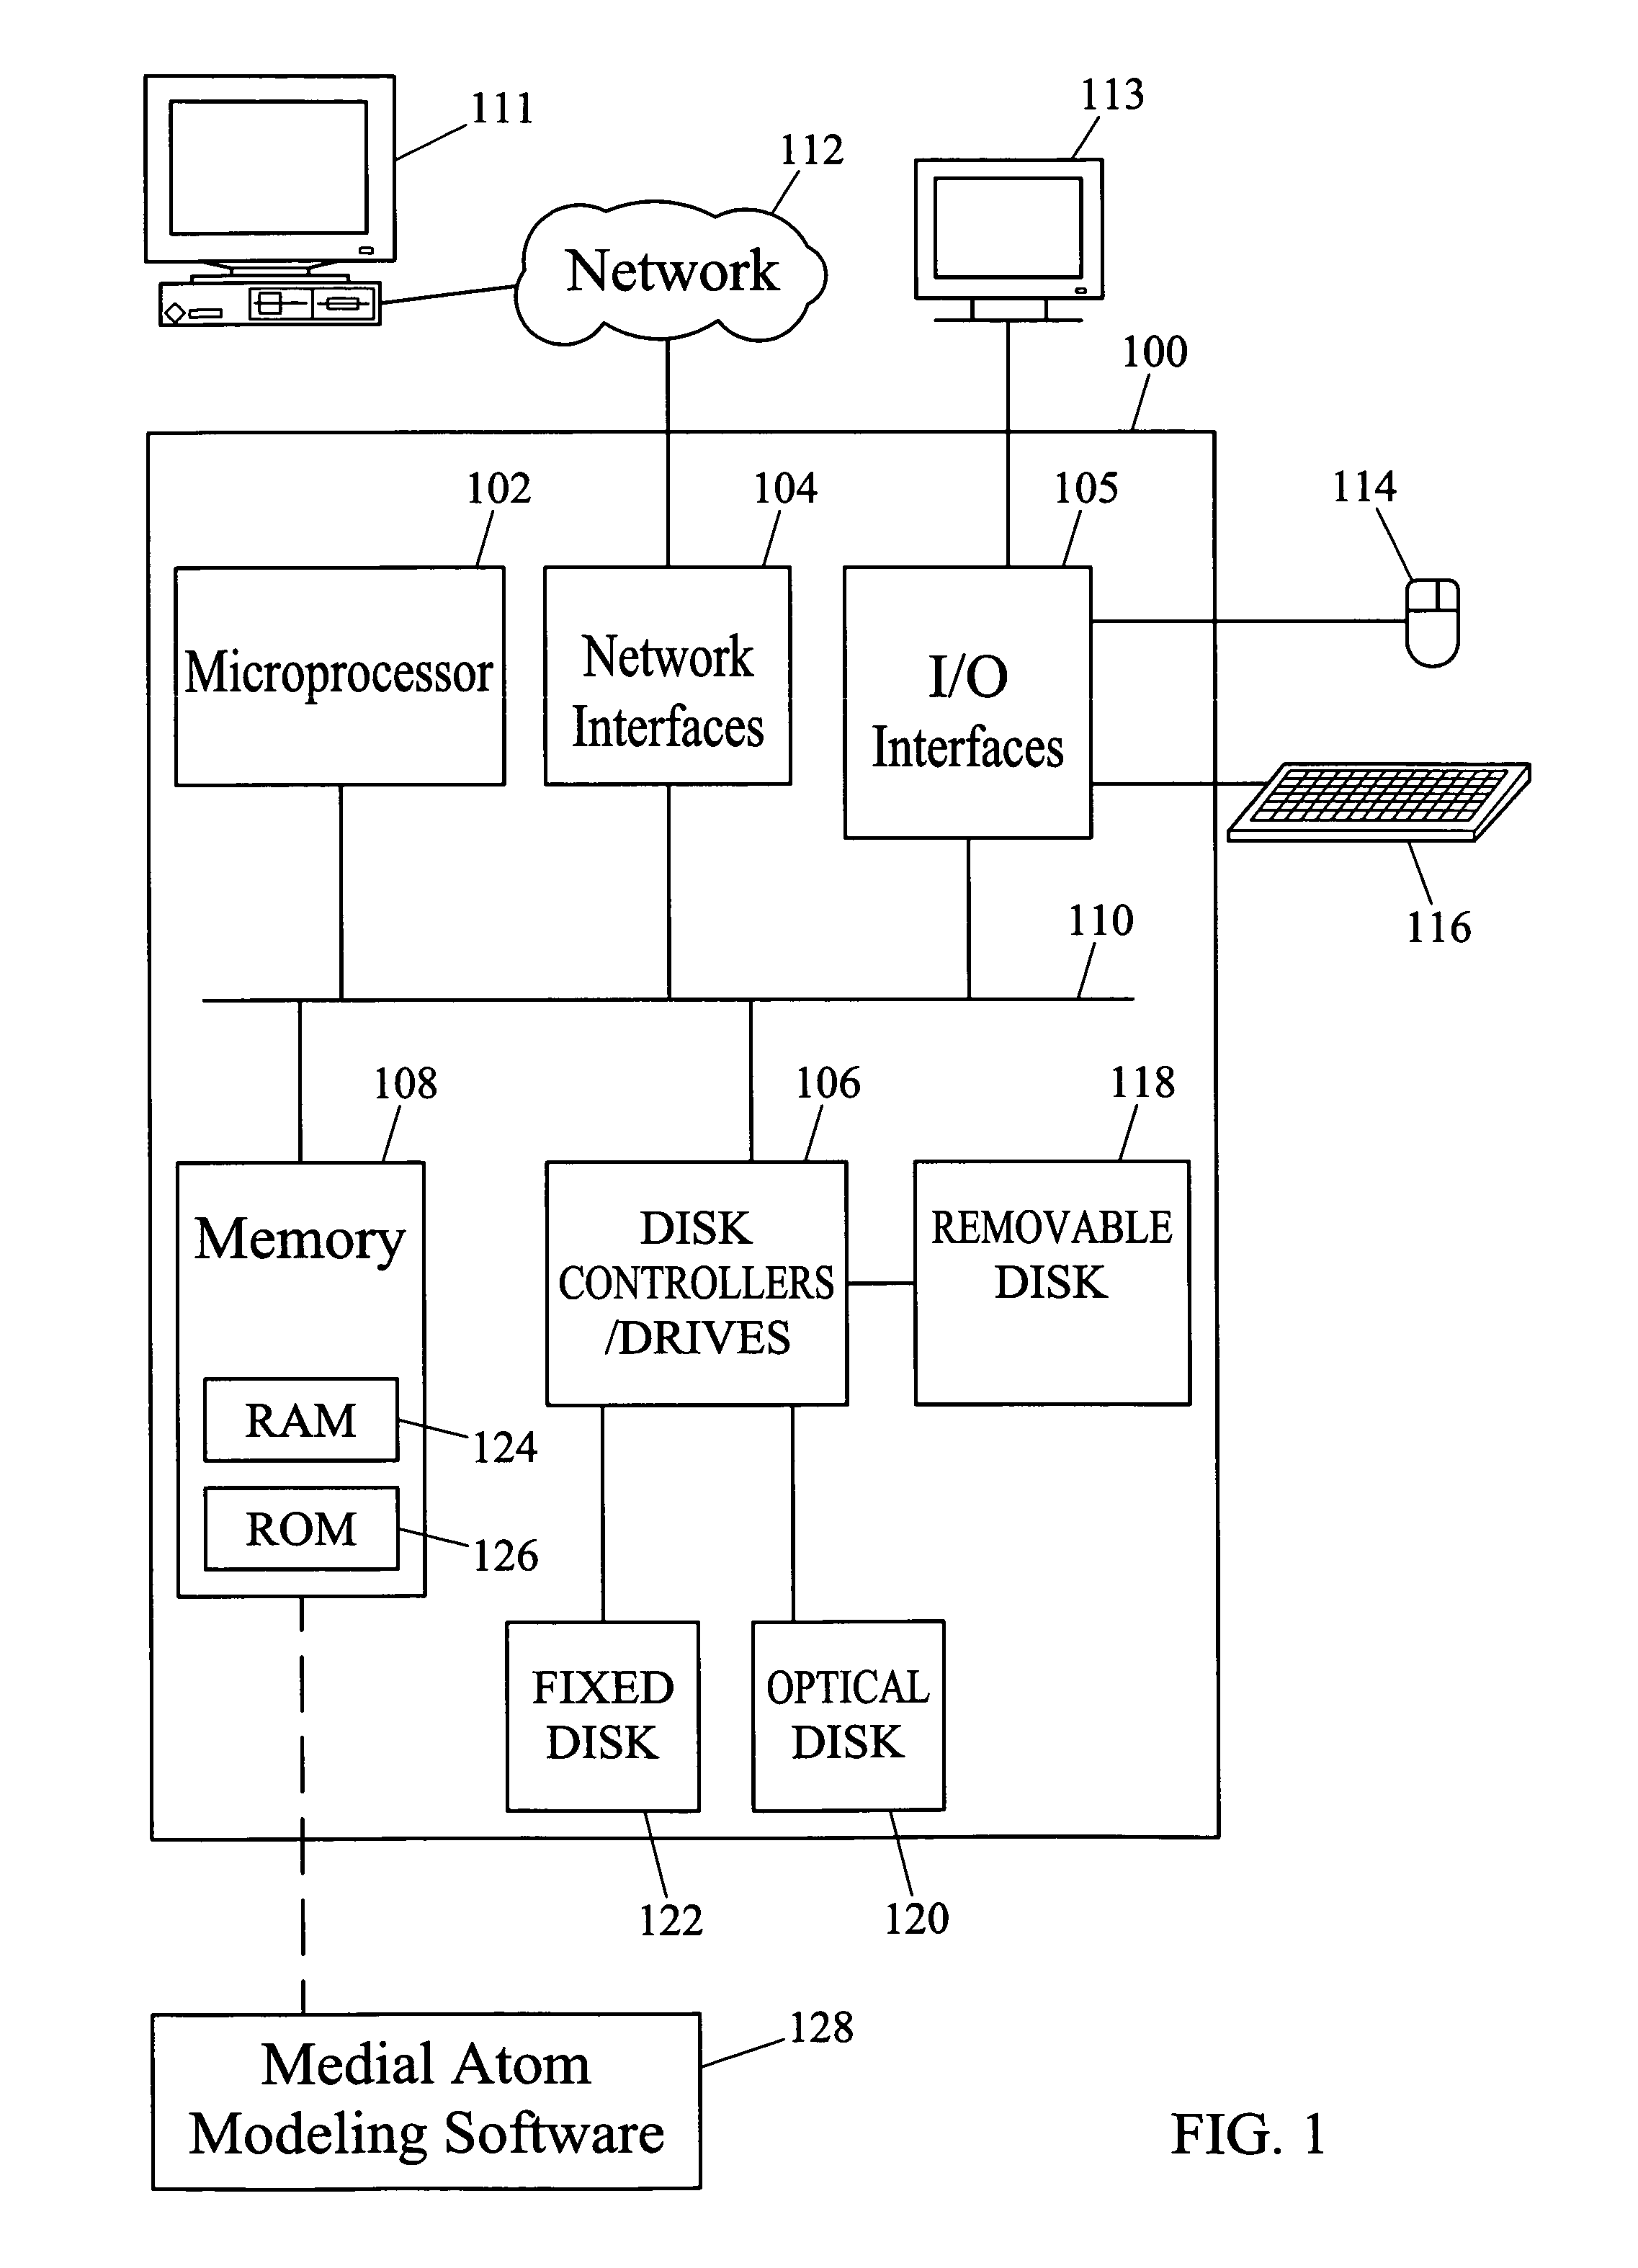 Methods and systems for modeling objects and object image data using medial atoms